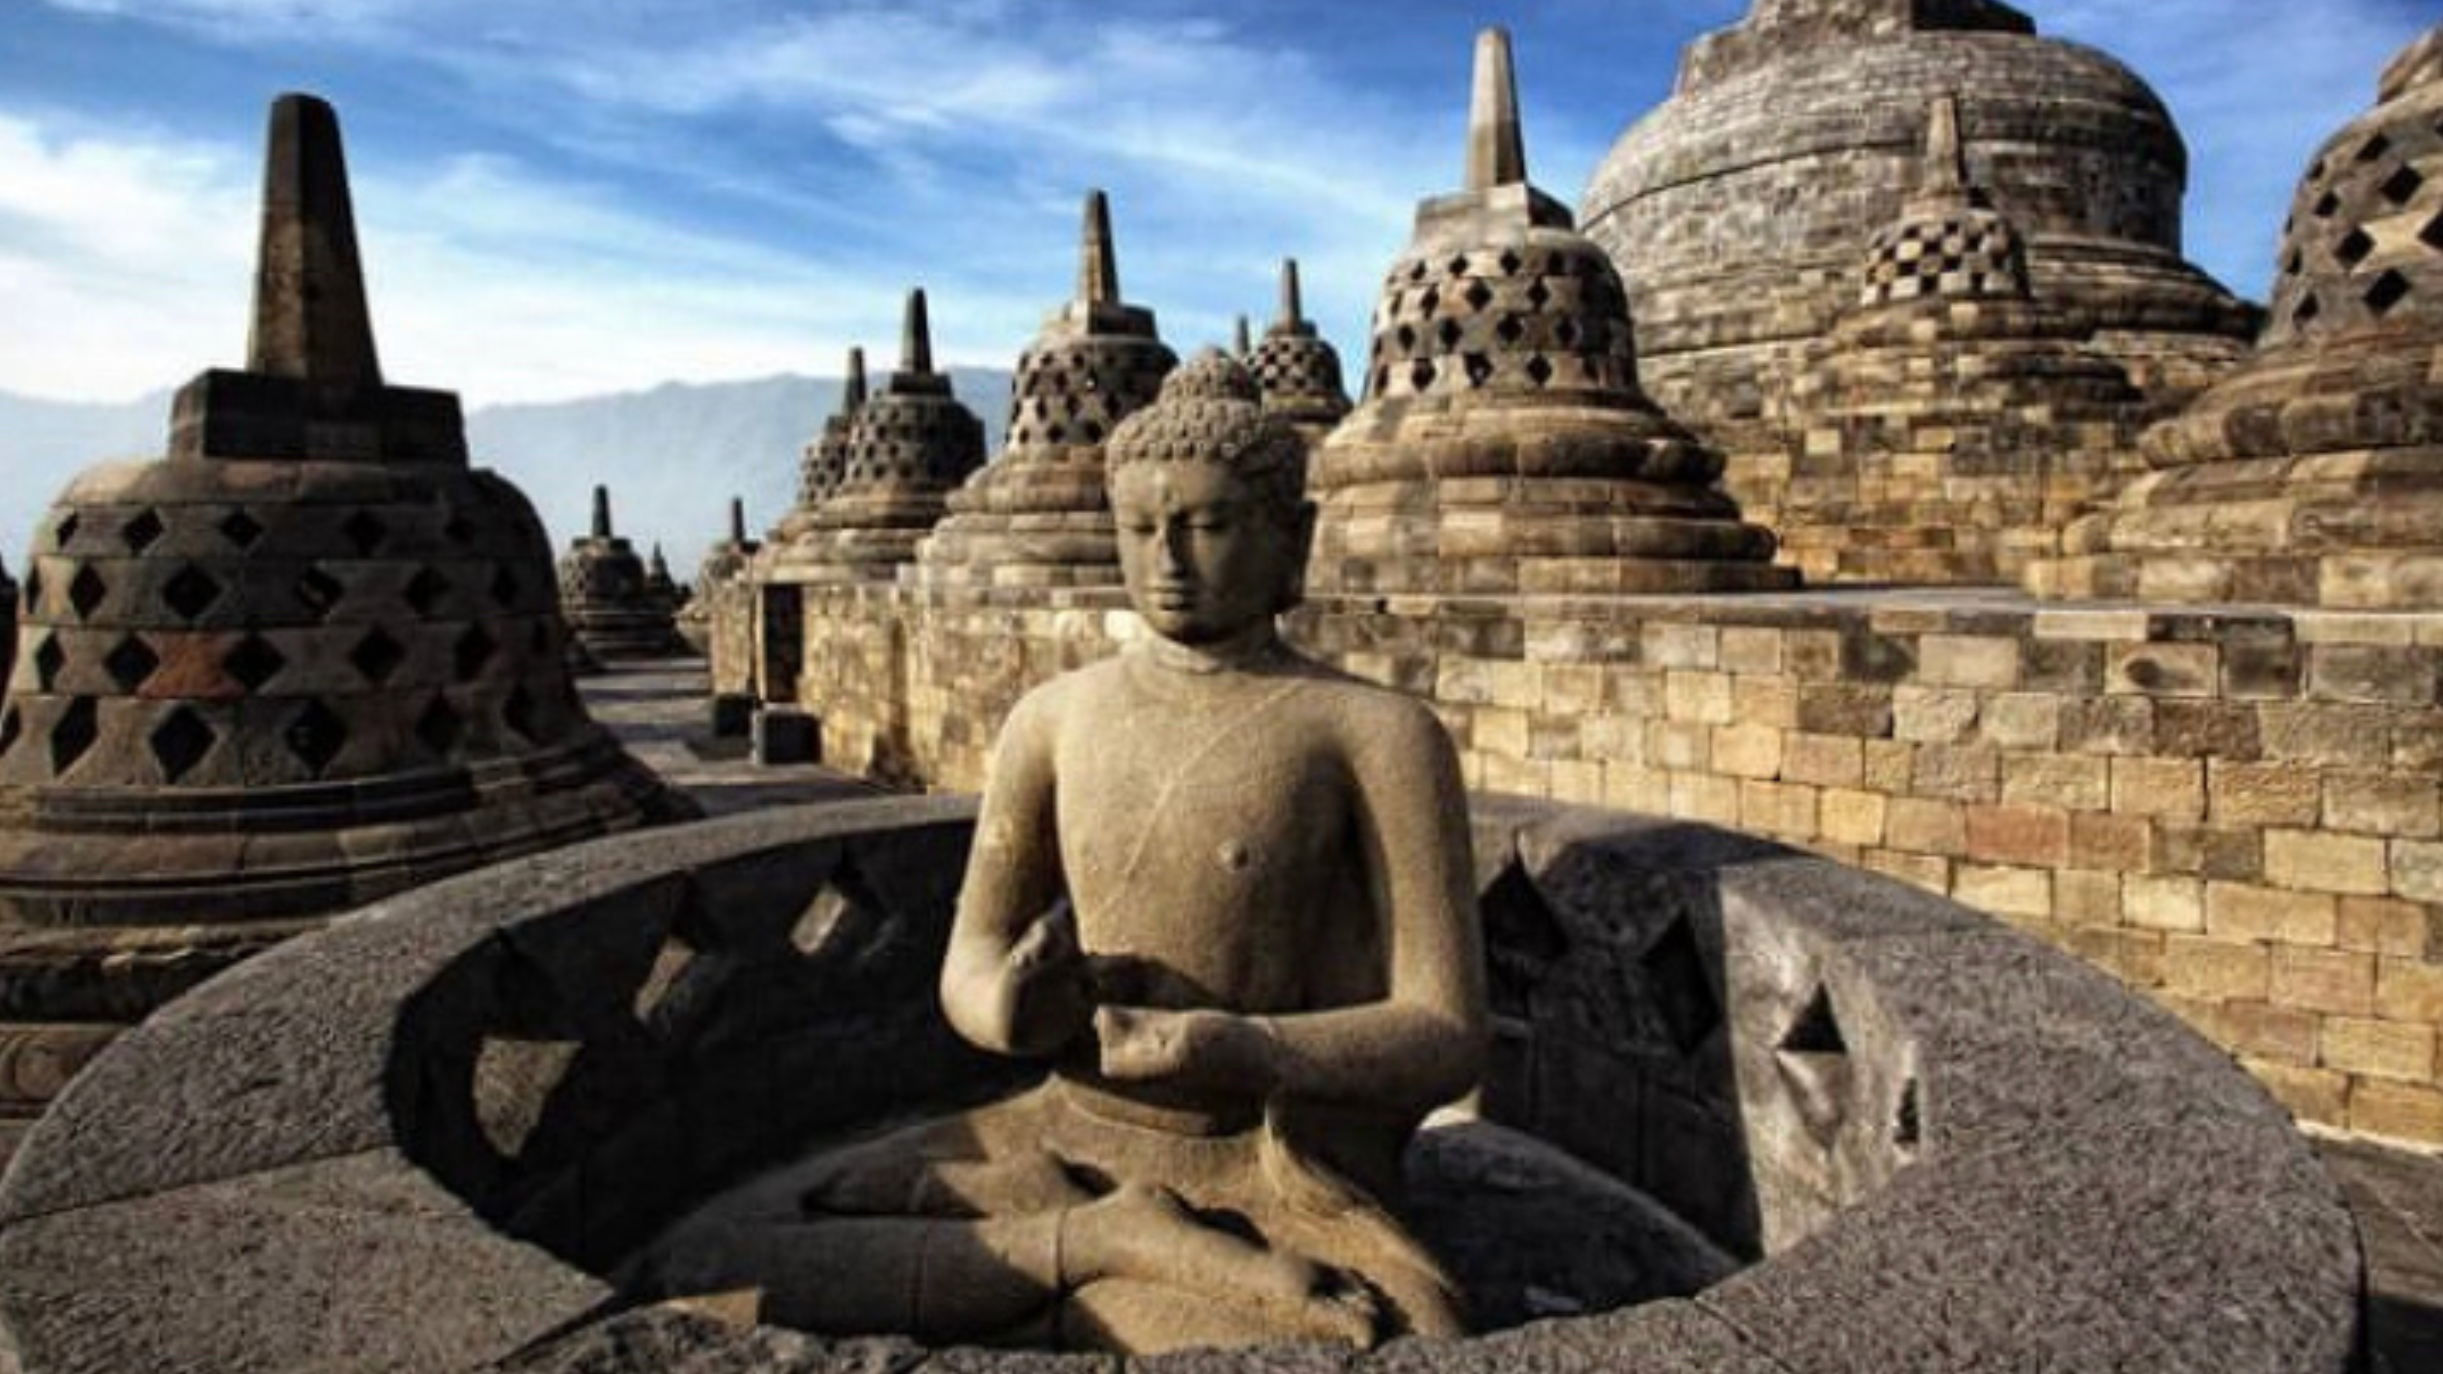 borobudur temple - view from up